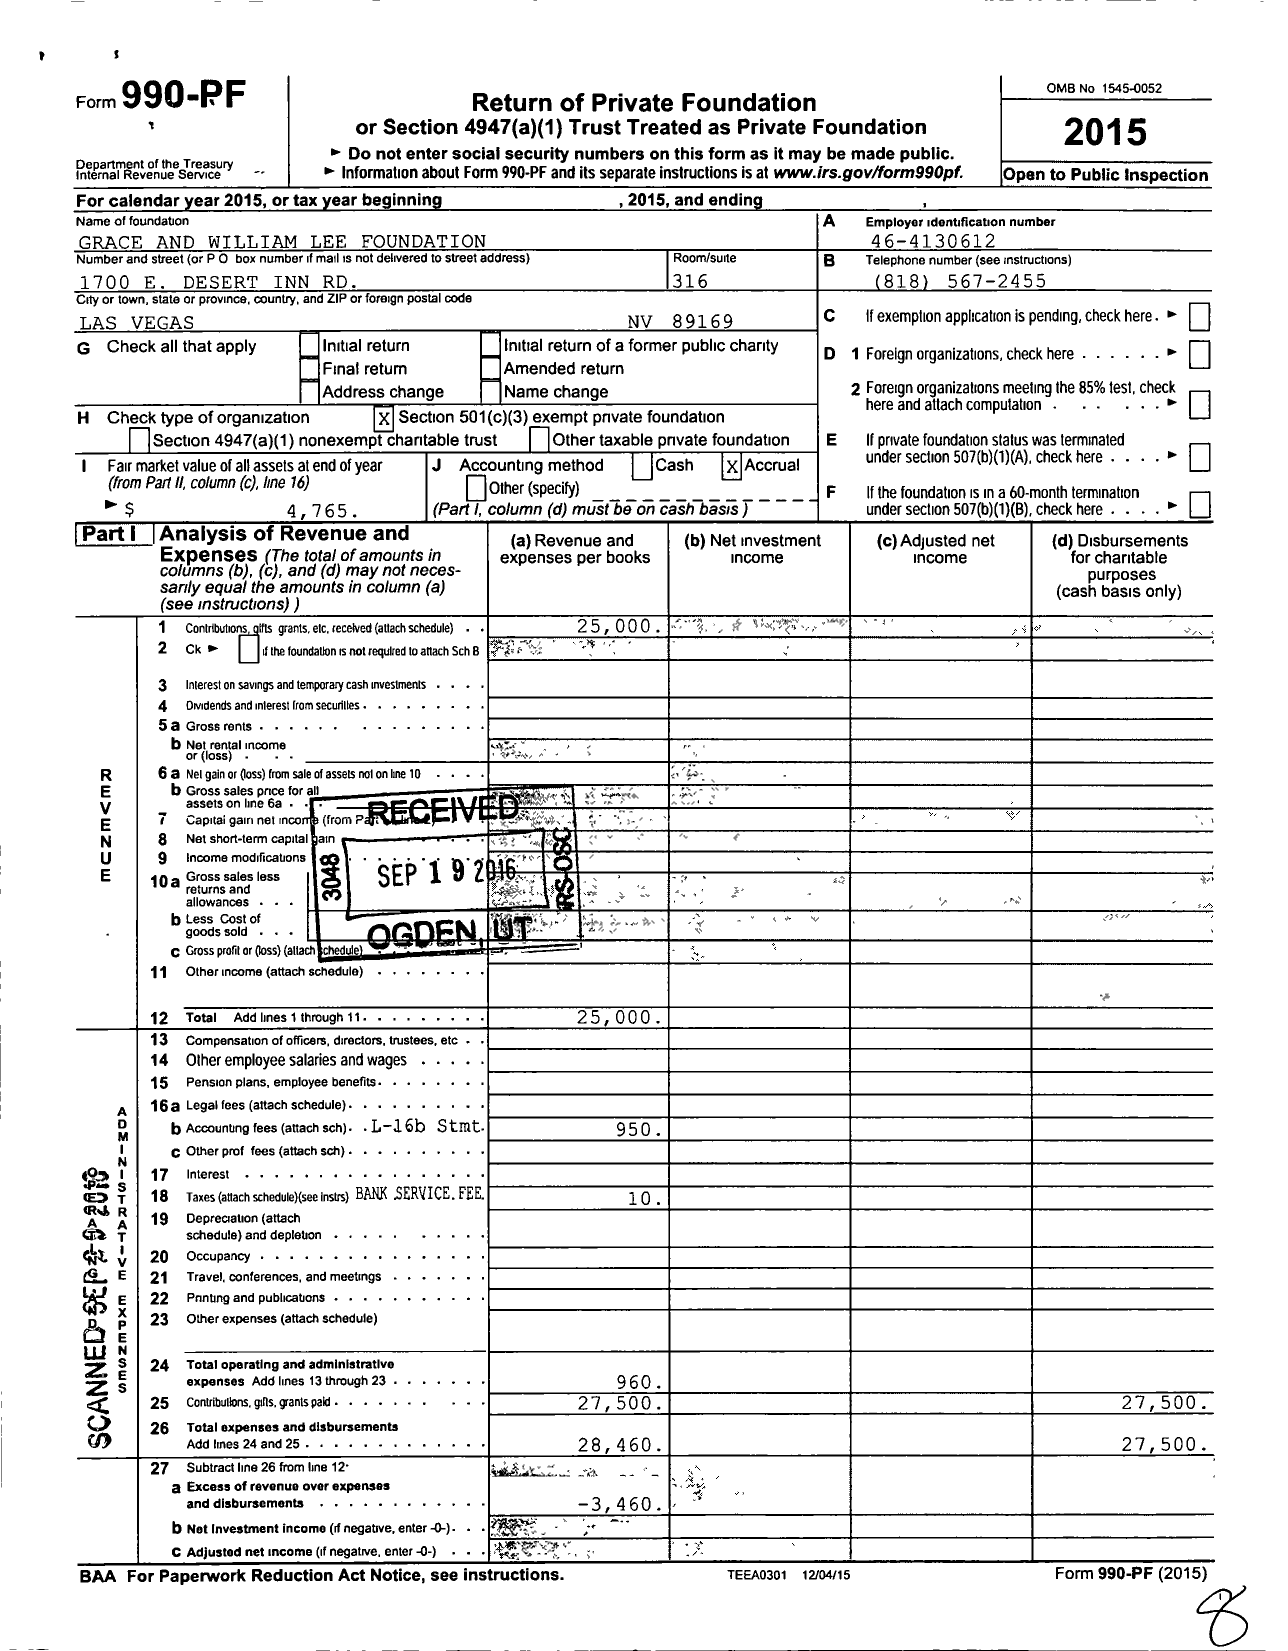 Image of first page of 2015 Form 990PF for Grace and William Lee Foundation